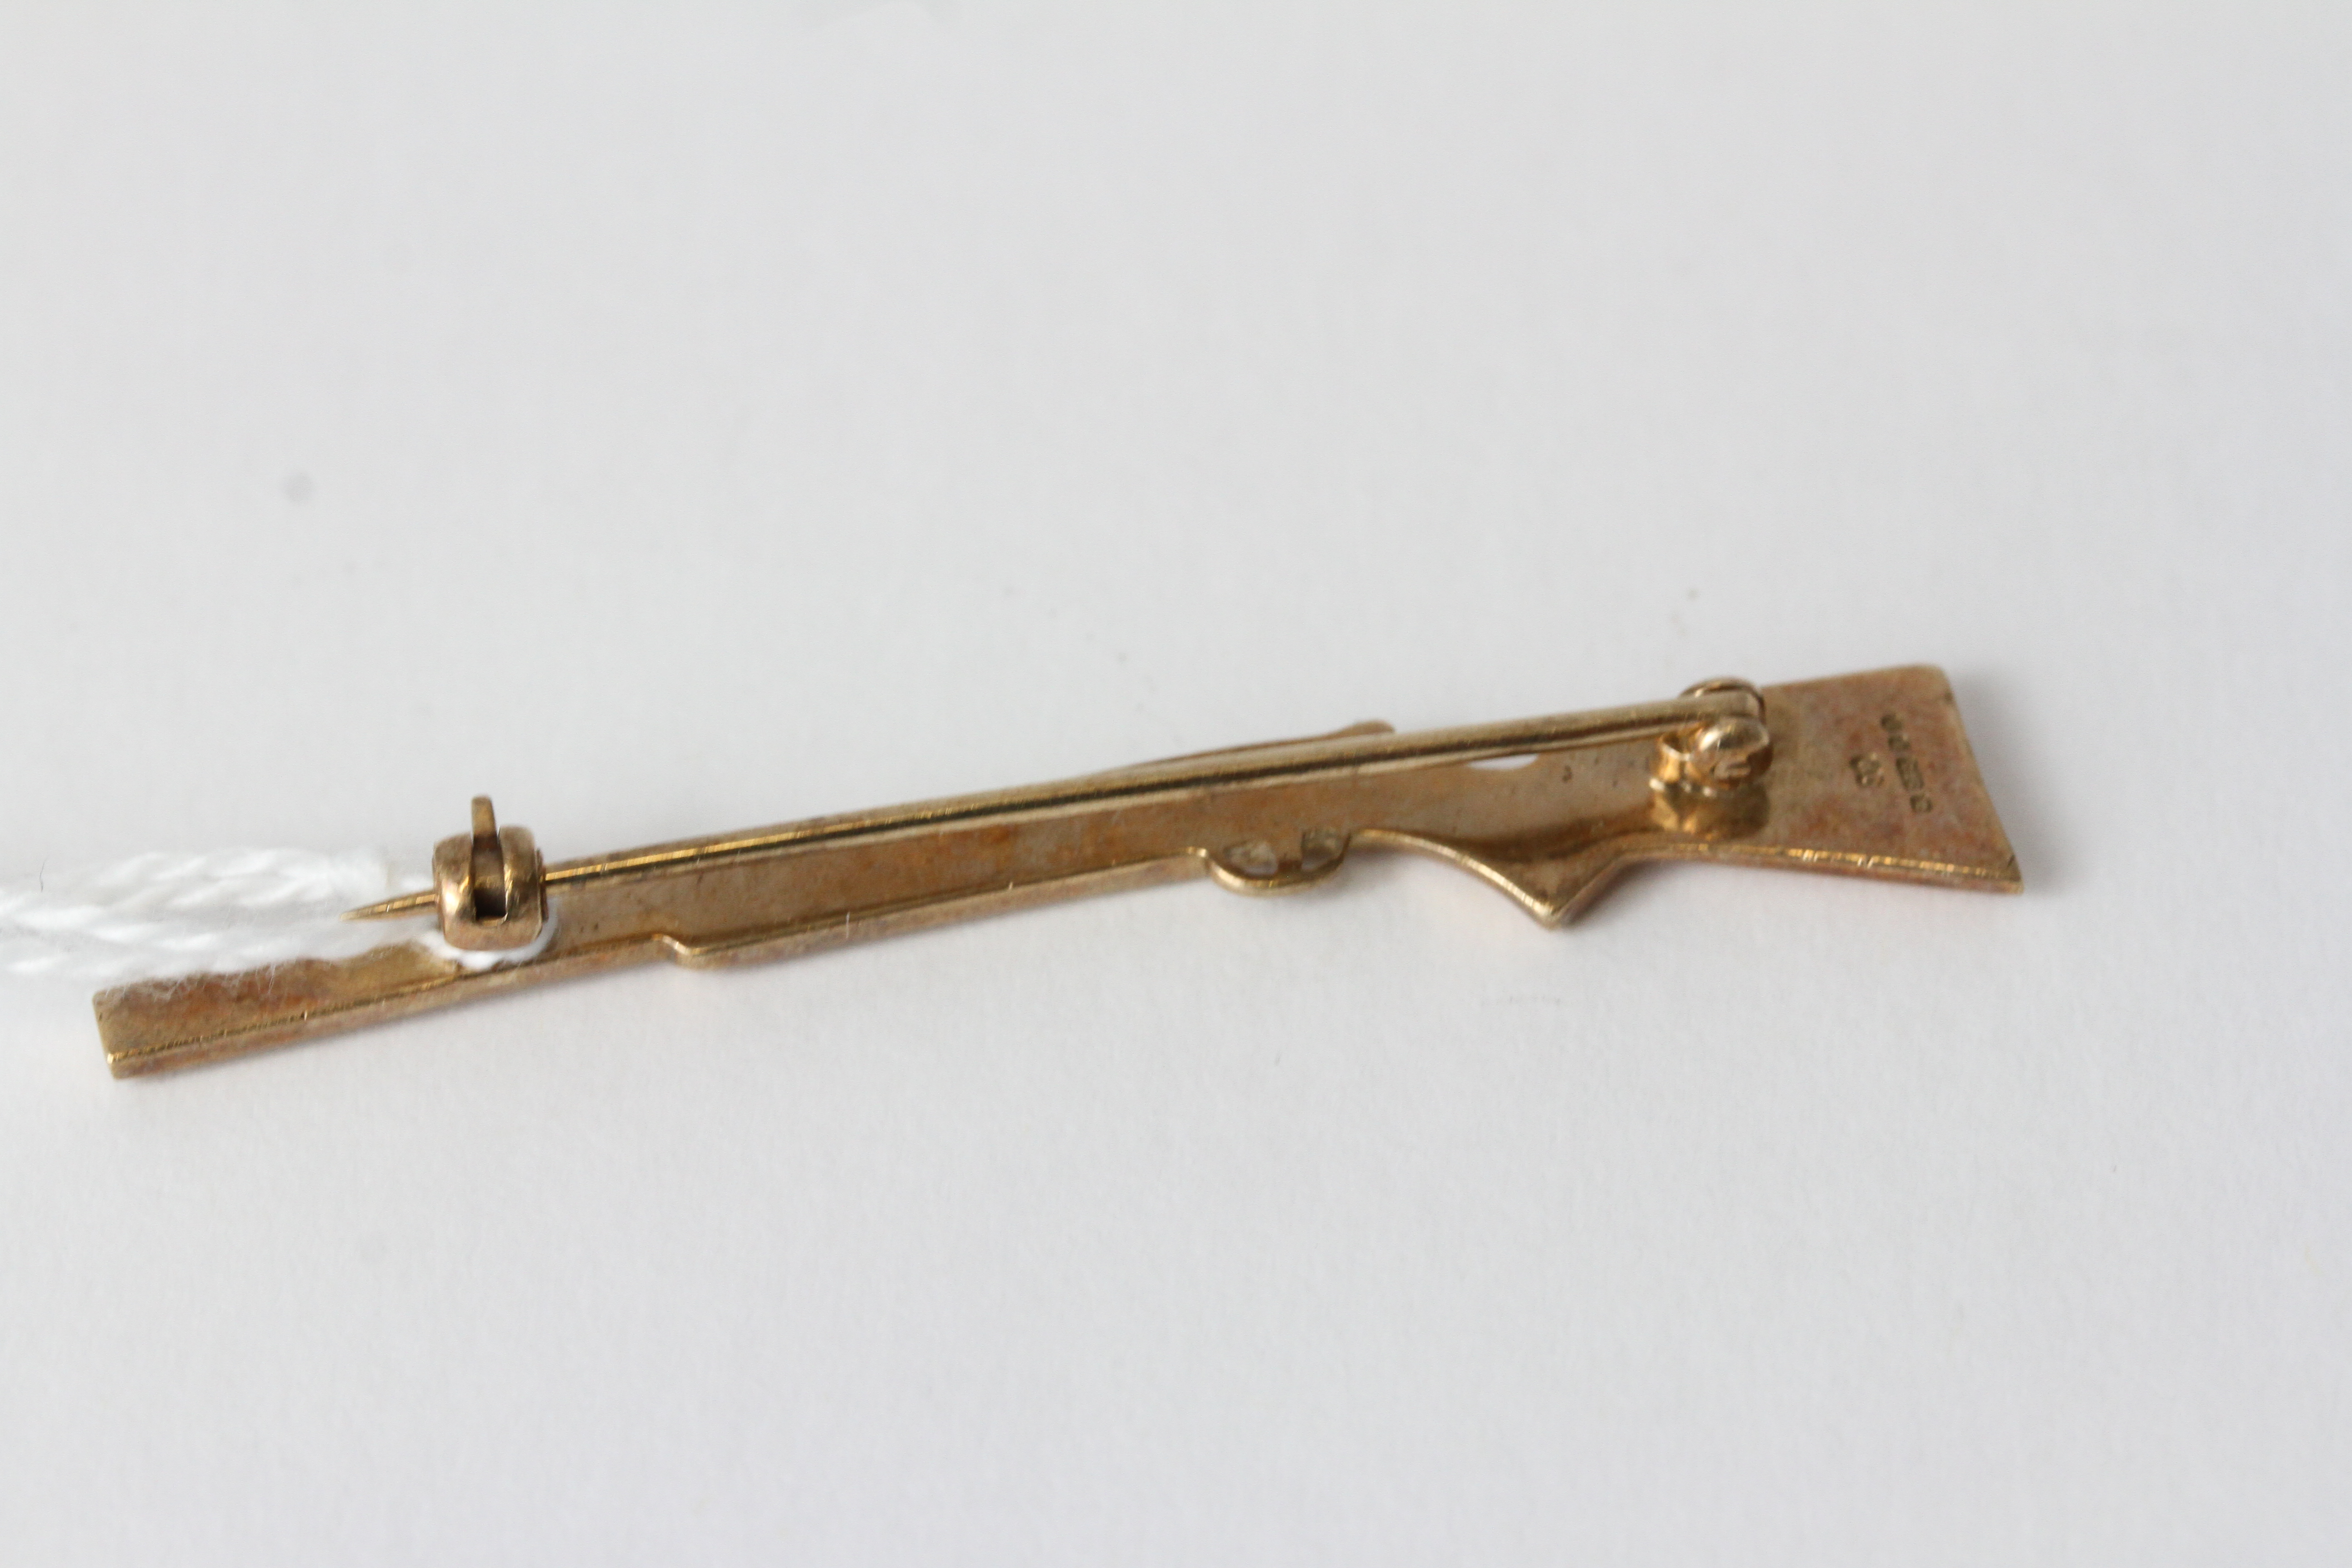 Vintage 9ct Gold Shotgun Hunting Brooch Fully hallmarked for 9ct Gold with a London Assay Office - Image 2 of 2